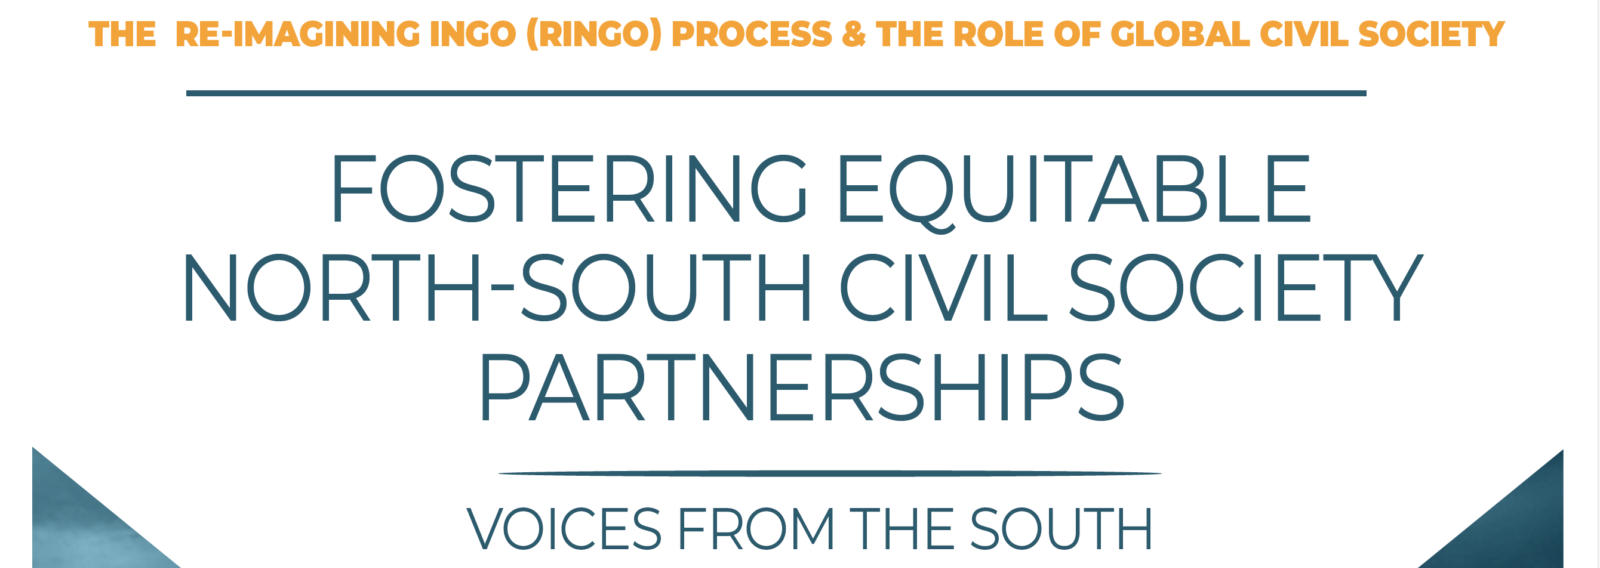 RINGO Project's First Research Report - Voices From the South